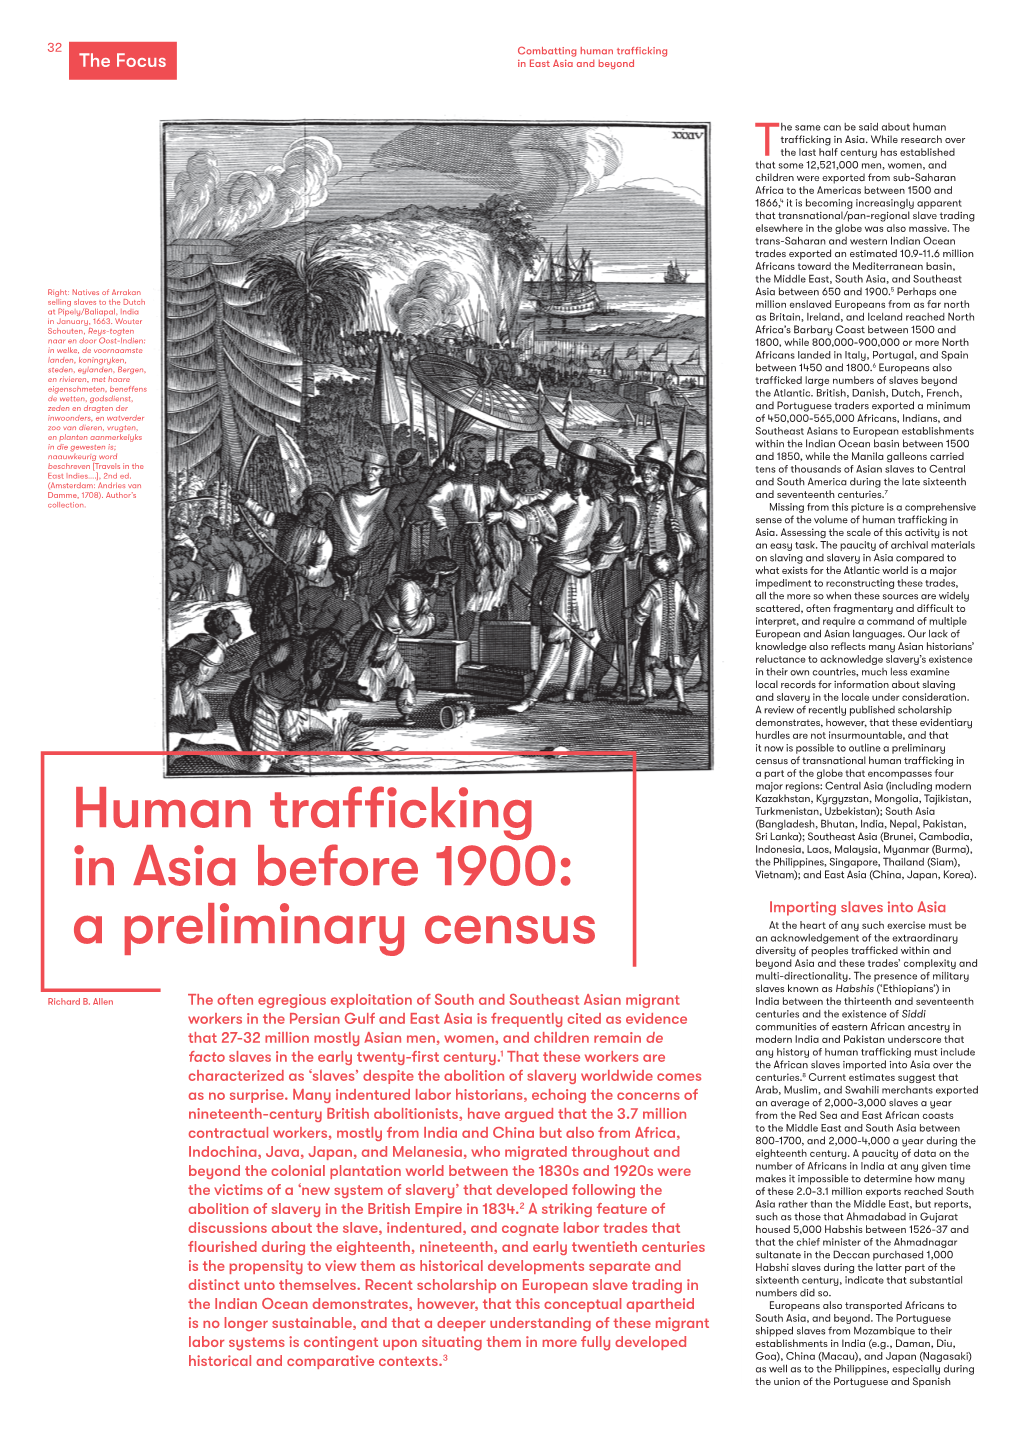 Human Trafficking in Asia Before 1900: a Preliminary Census